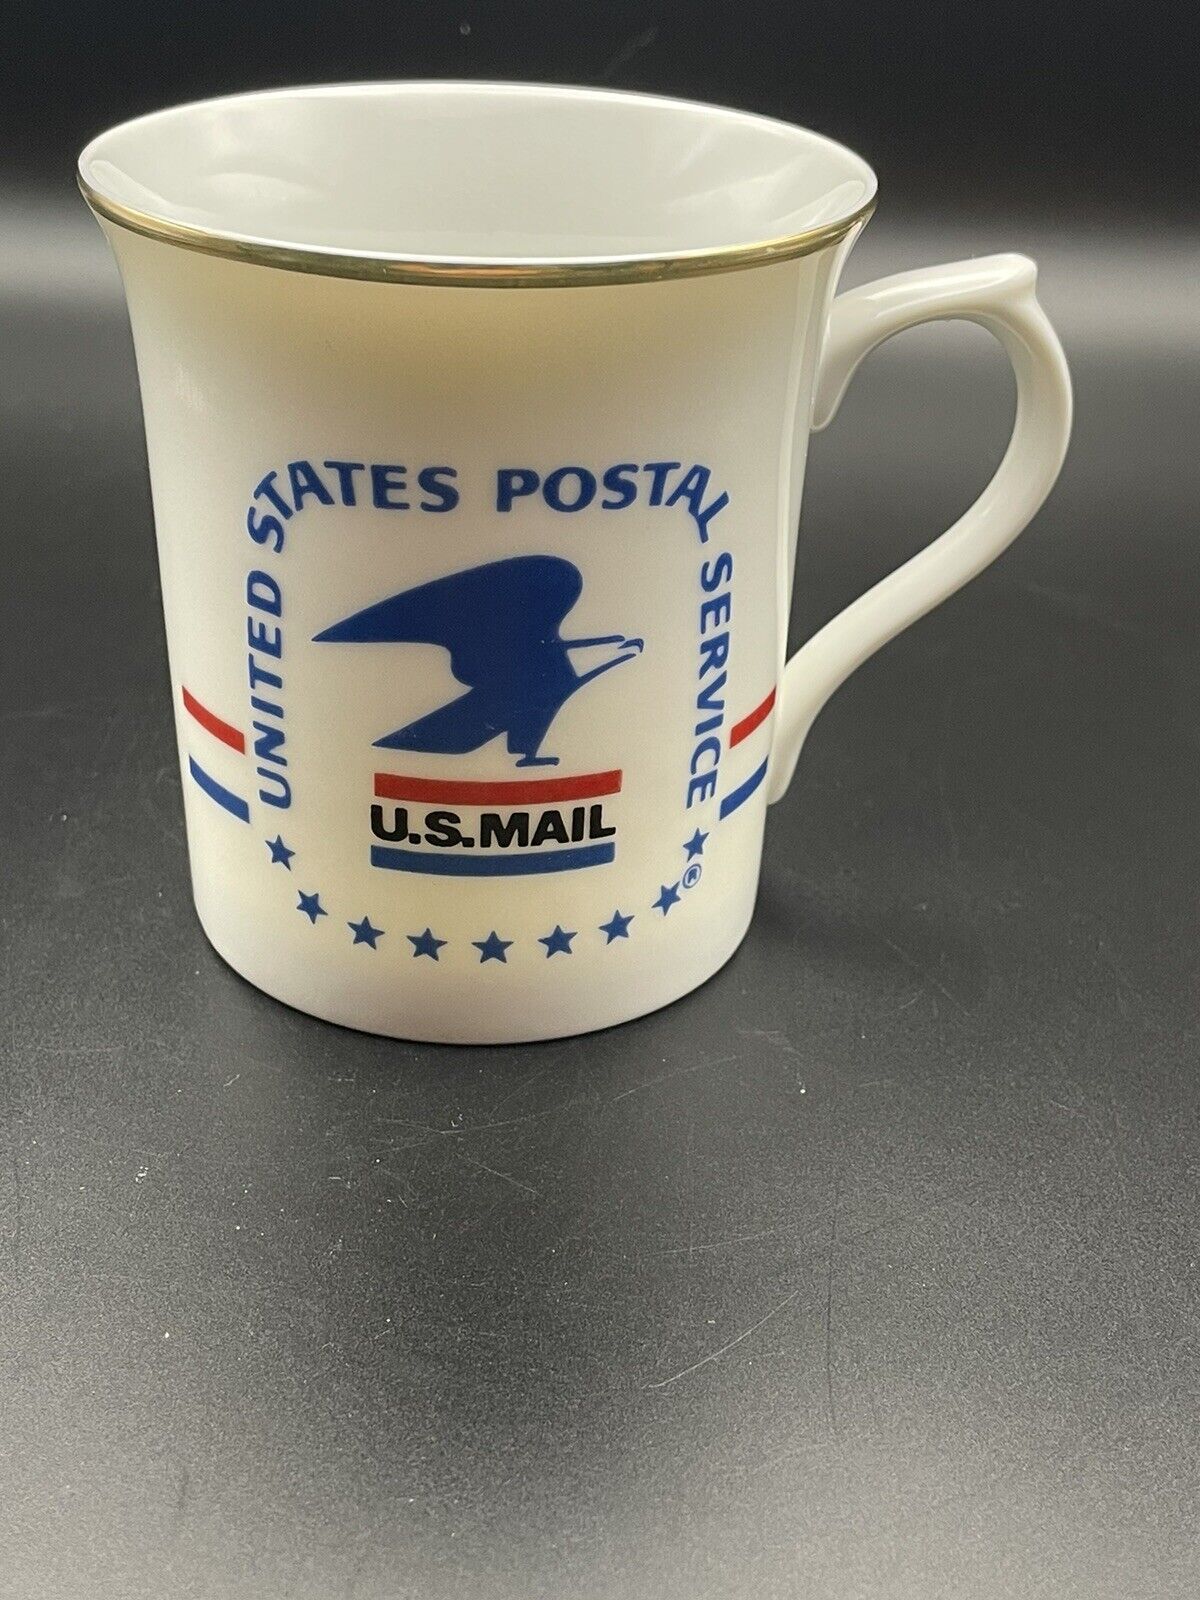 United States postal service-Gold trim porcelain coffee cup US mail  Advertising